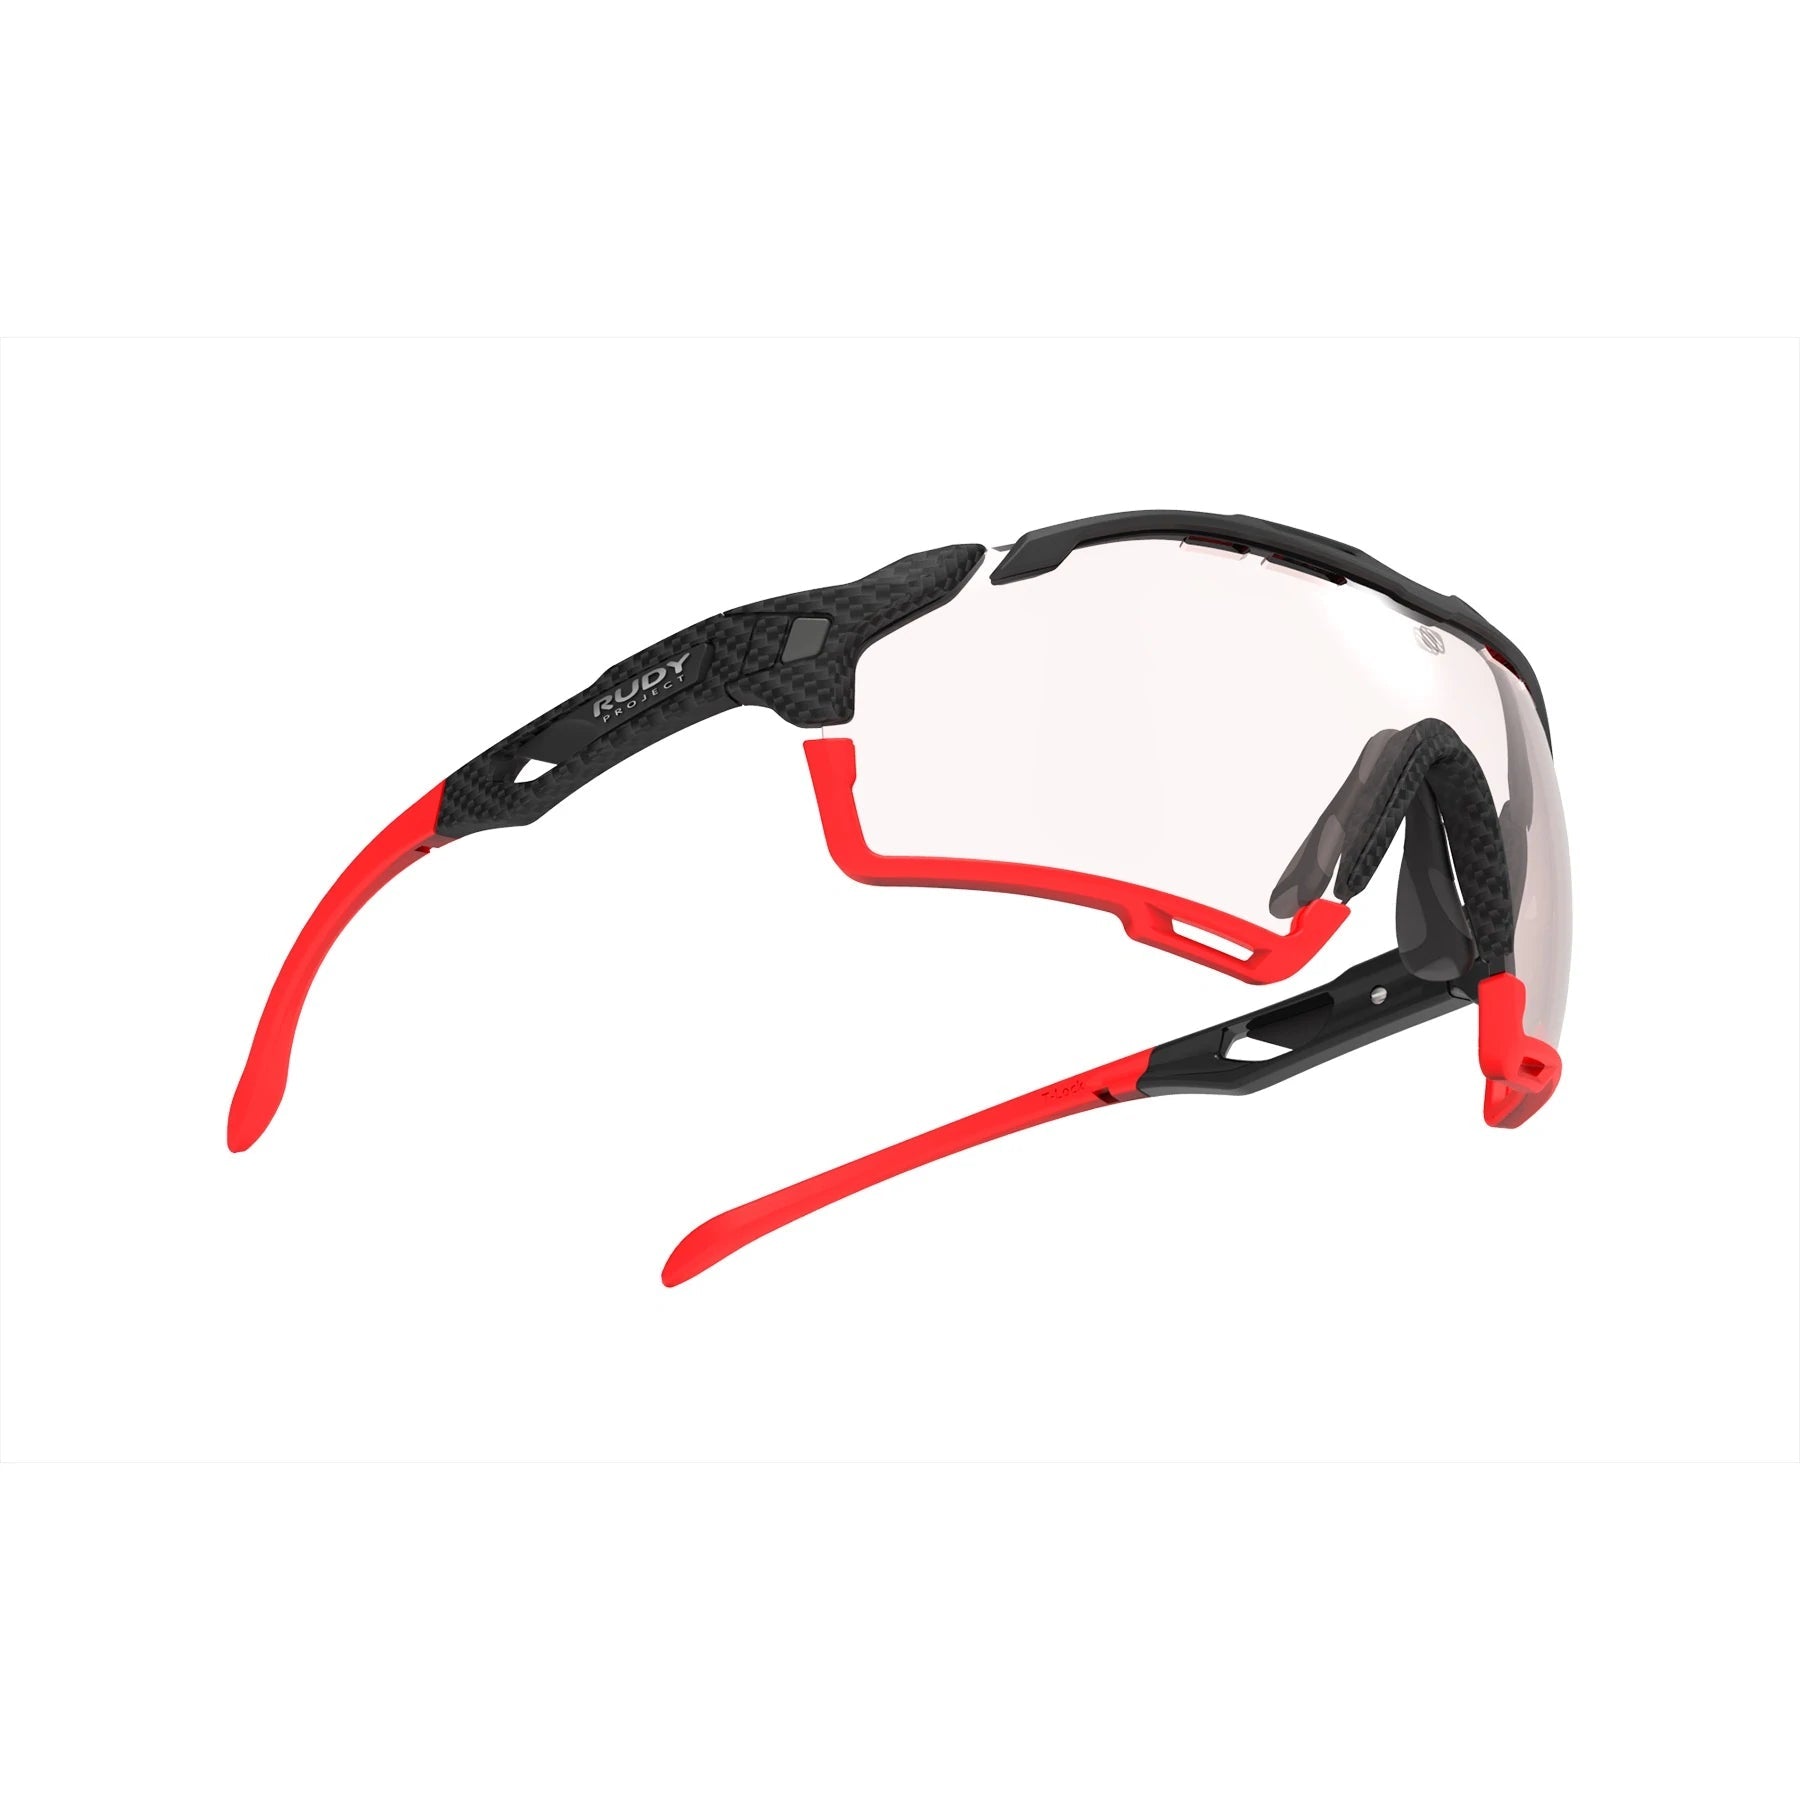 Rudy Project cycling sunglasses#color_cutline-carbonium-frame-with-impactx-photochromic-2-red-lenses-red-bumpers